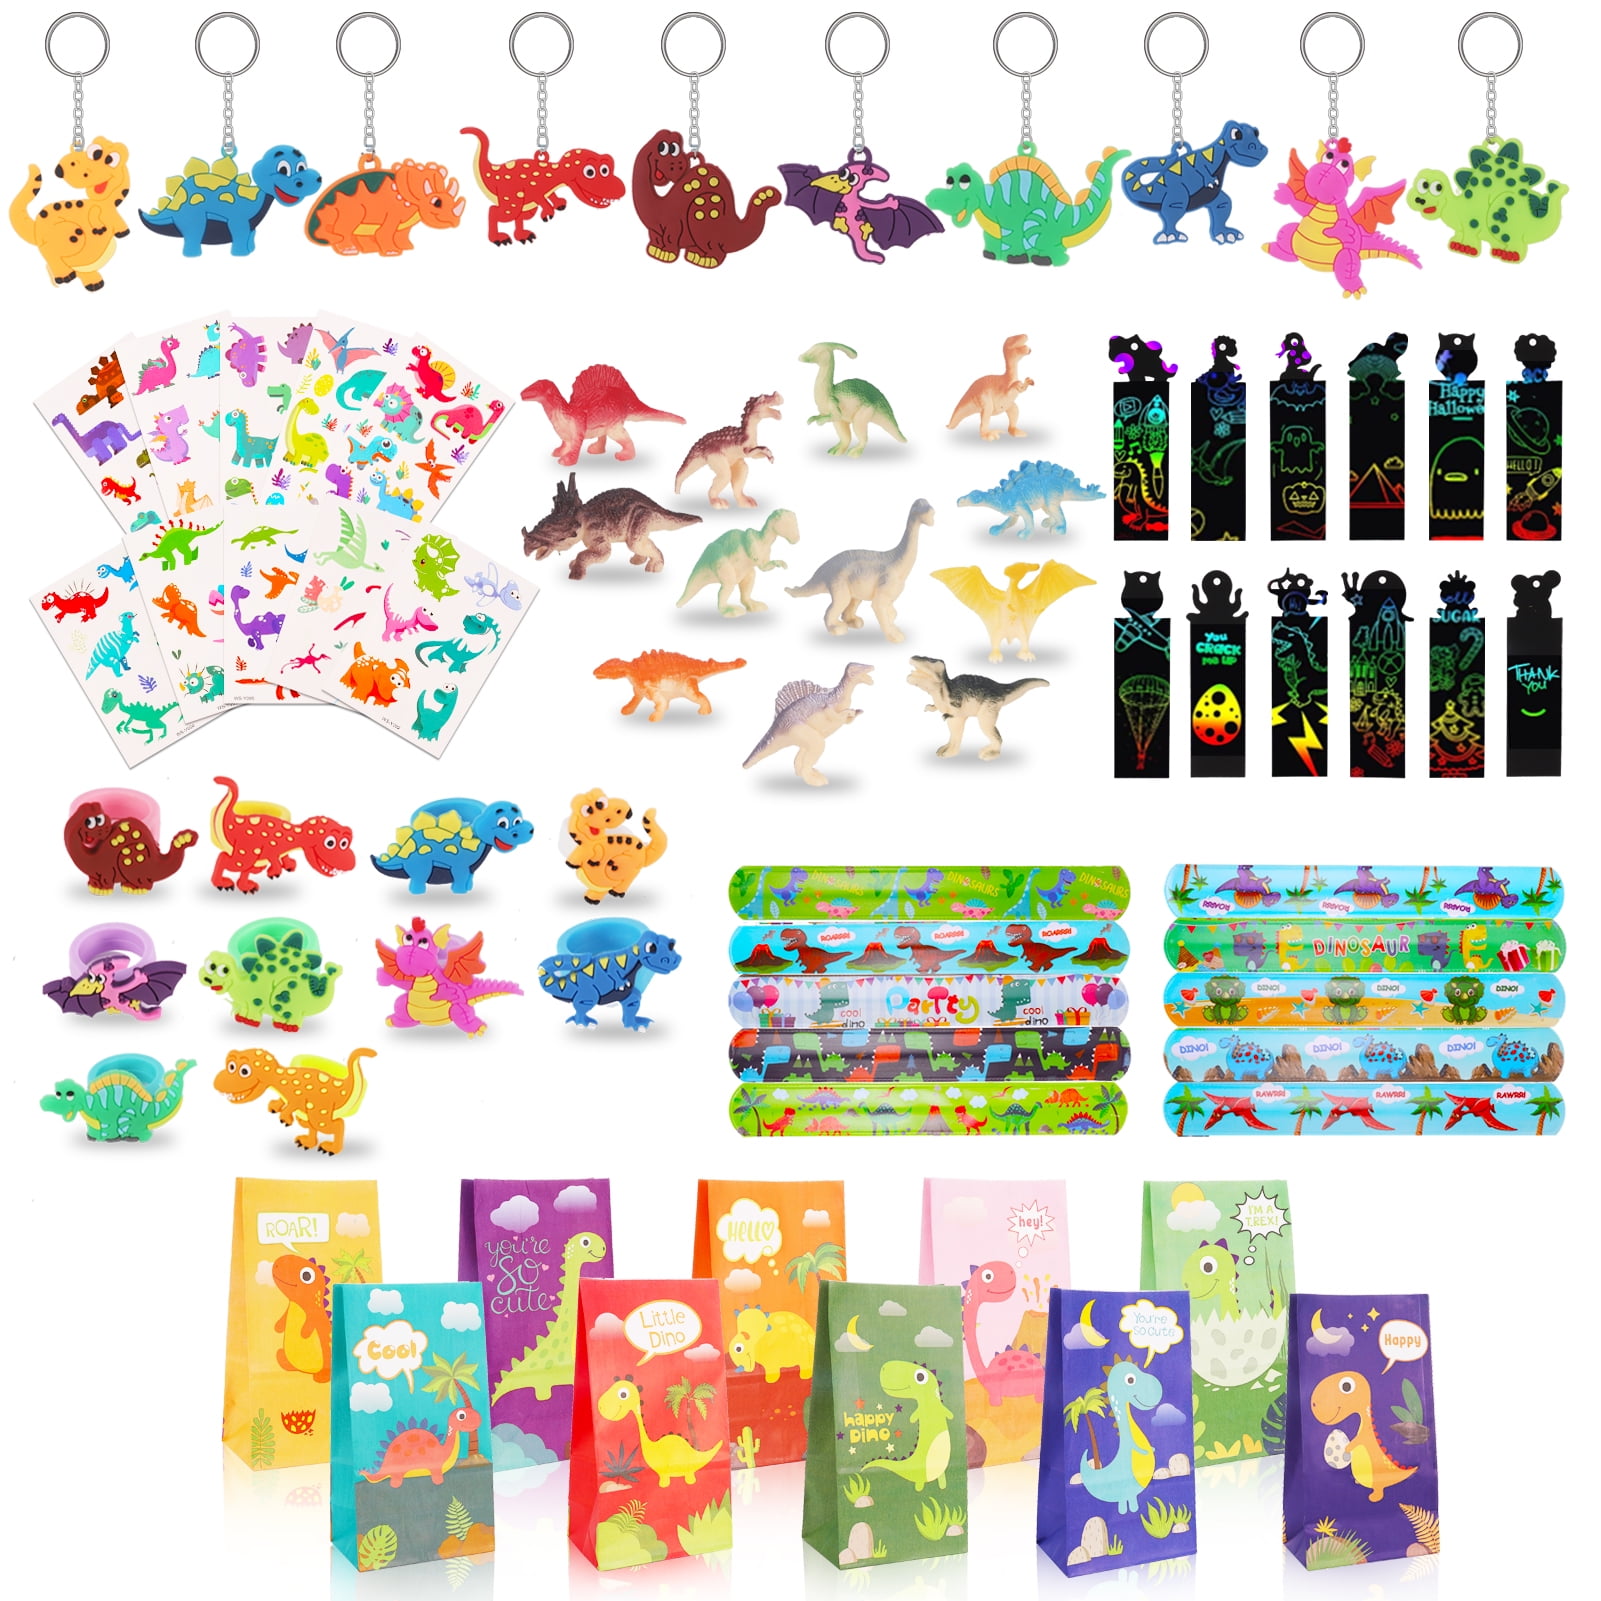 Make-Your-Own Dino Stickers - Prizes and Giveaways - 100 per Pack